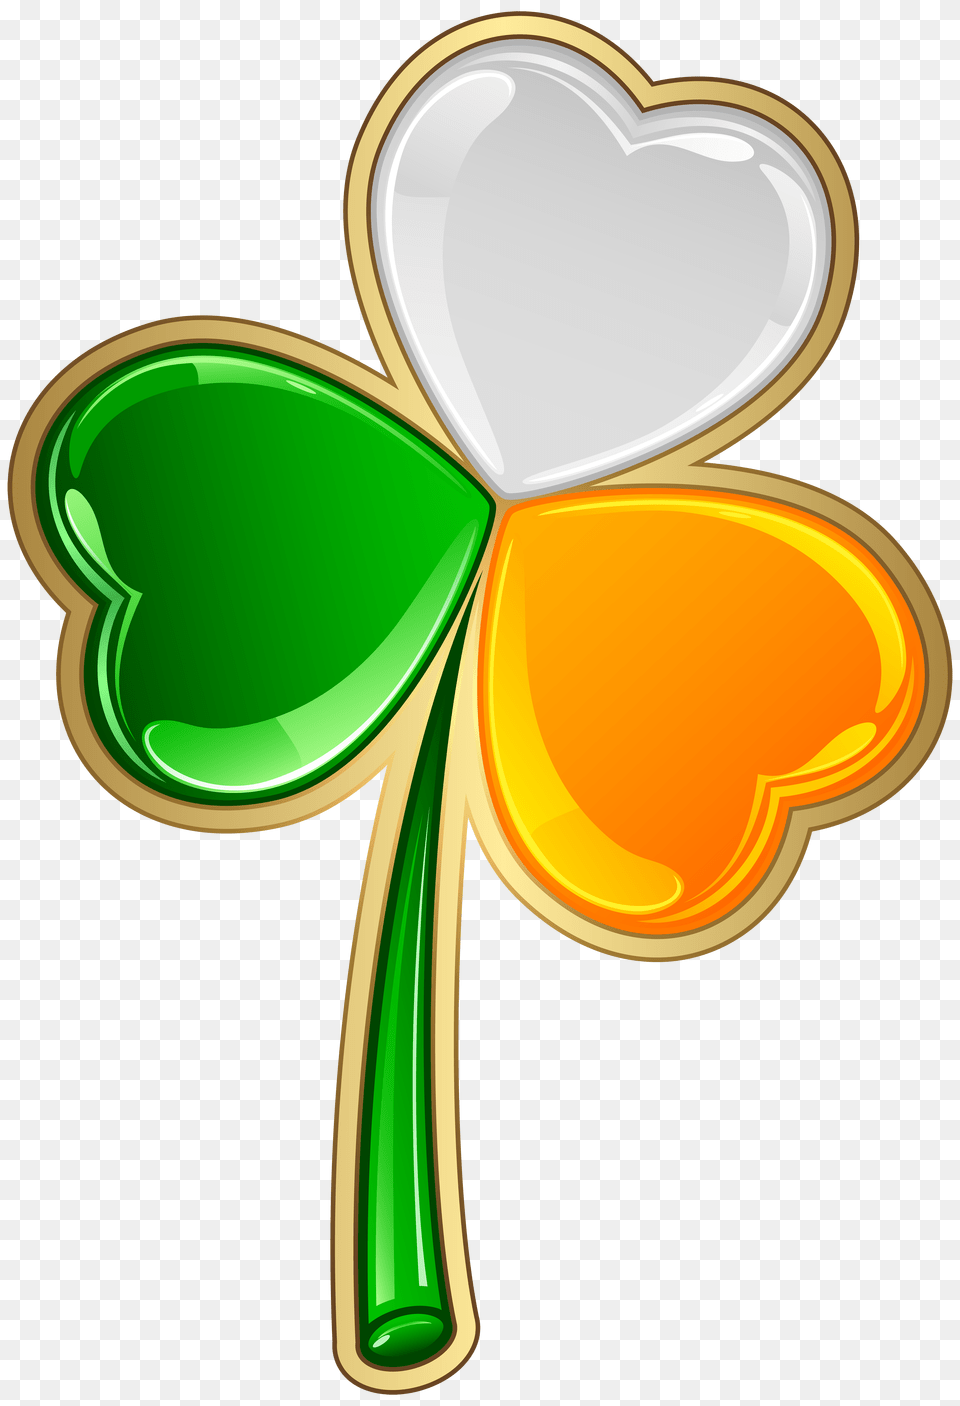 Microphone Clipart Irish Flags Filenuvola Flagsvg Irish Shamrock Transparent, Cutlery, Spoon, Food, Sweets Free Png Download